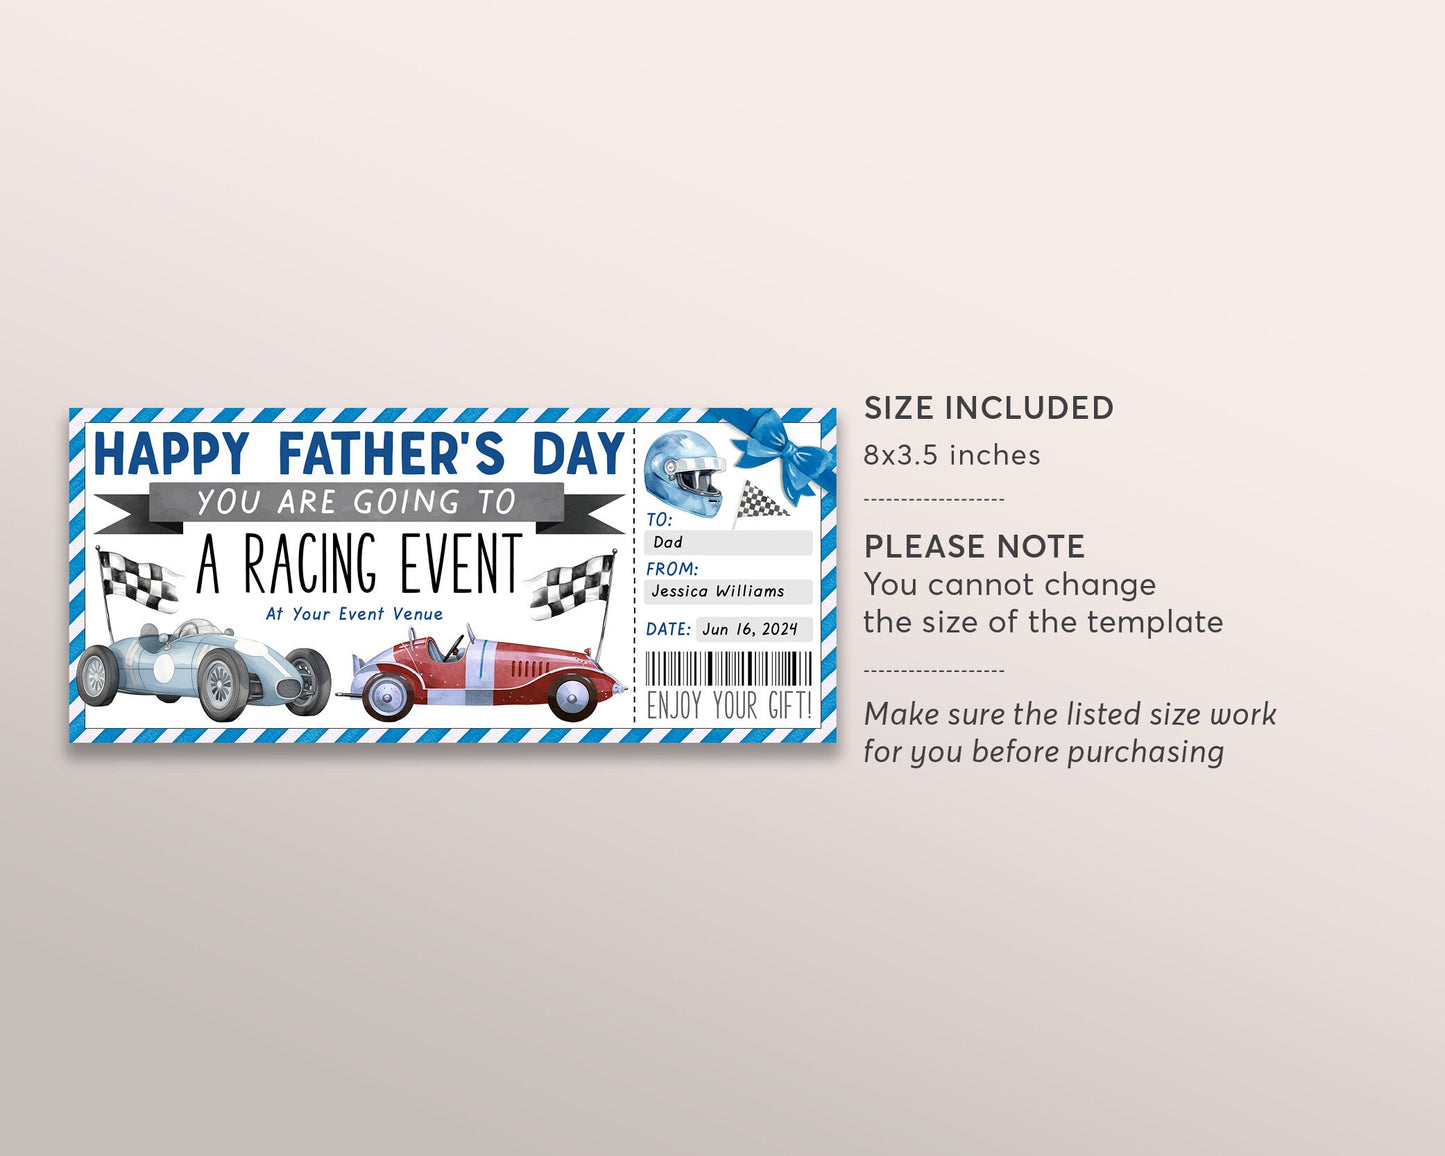 Fathers Day Car Race Ticket Gift Certificate Editable Template, Car Racing Event Voucher Dad, Supercar Race Track Driving Go Kart Coupon